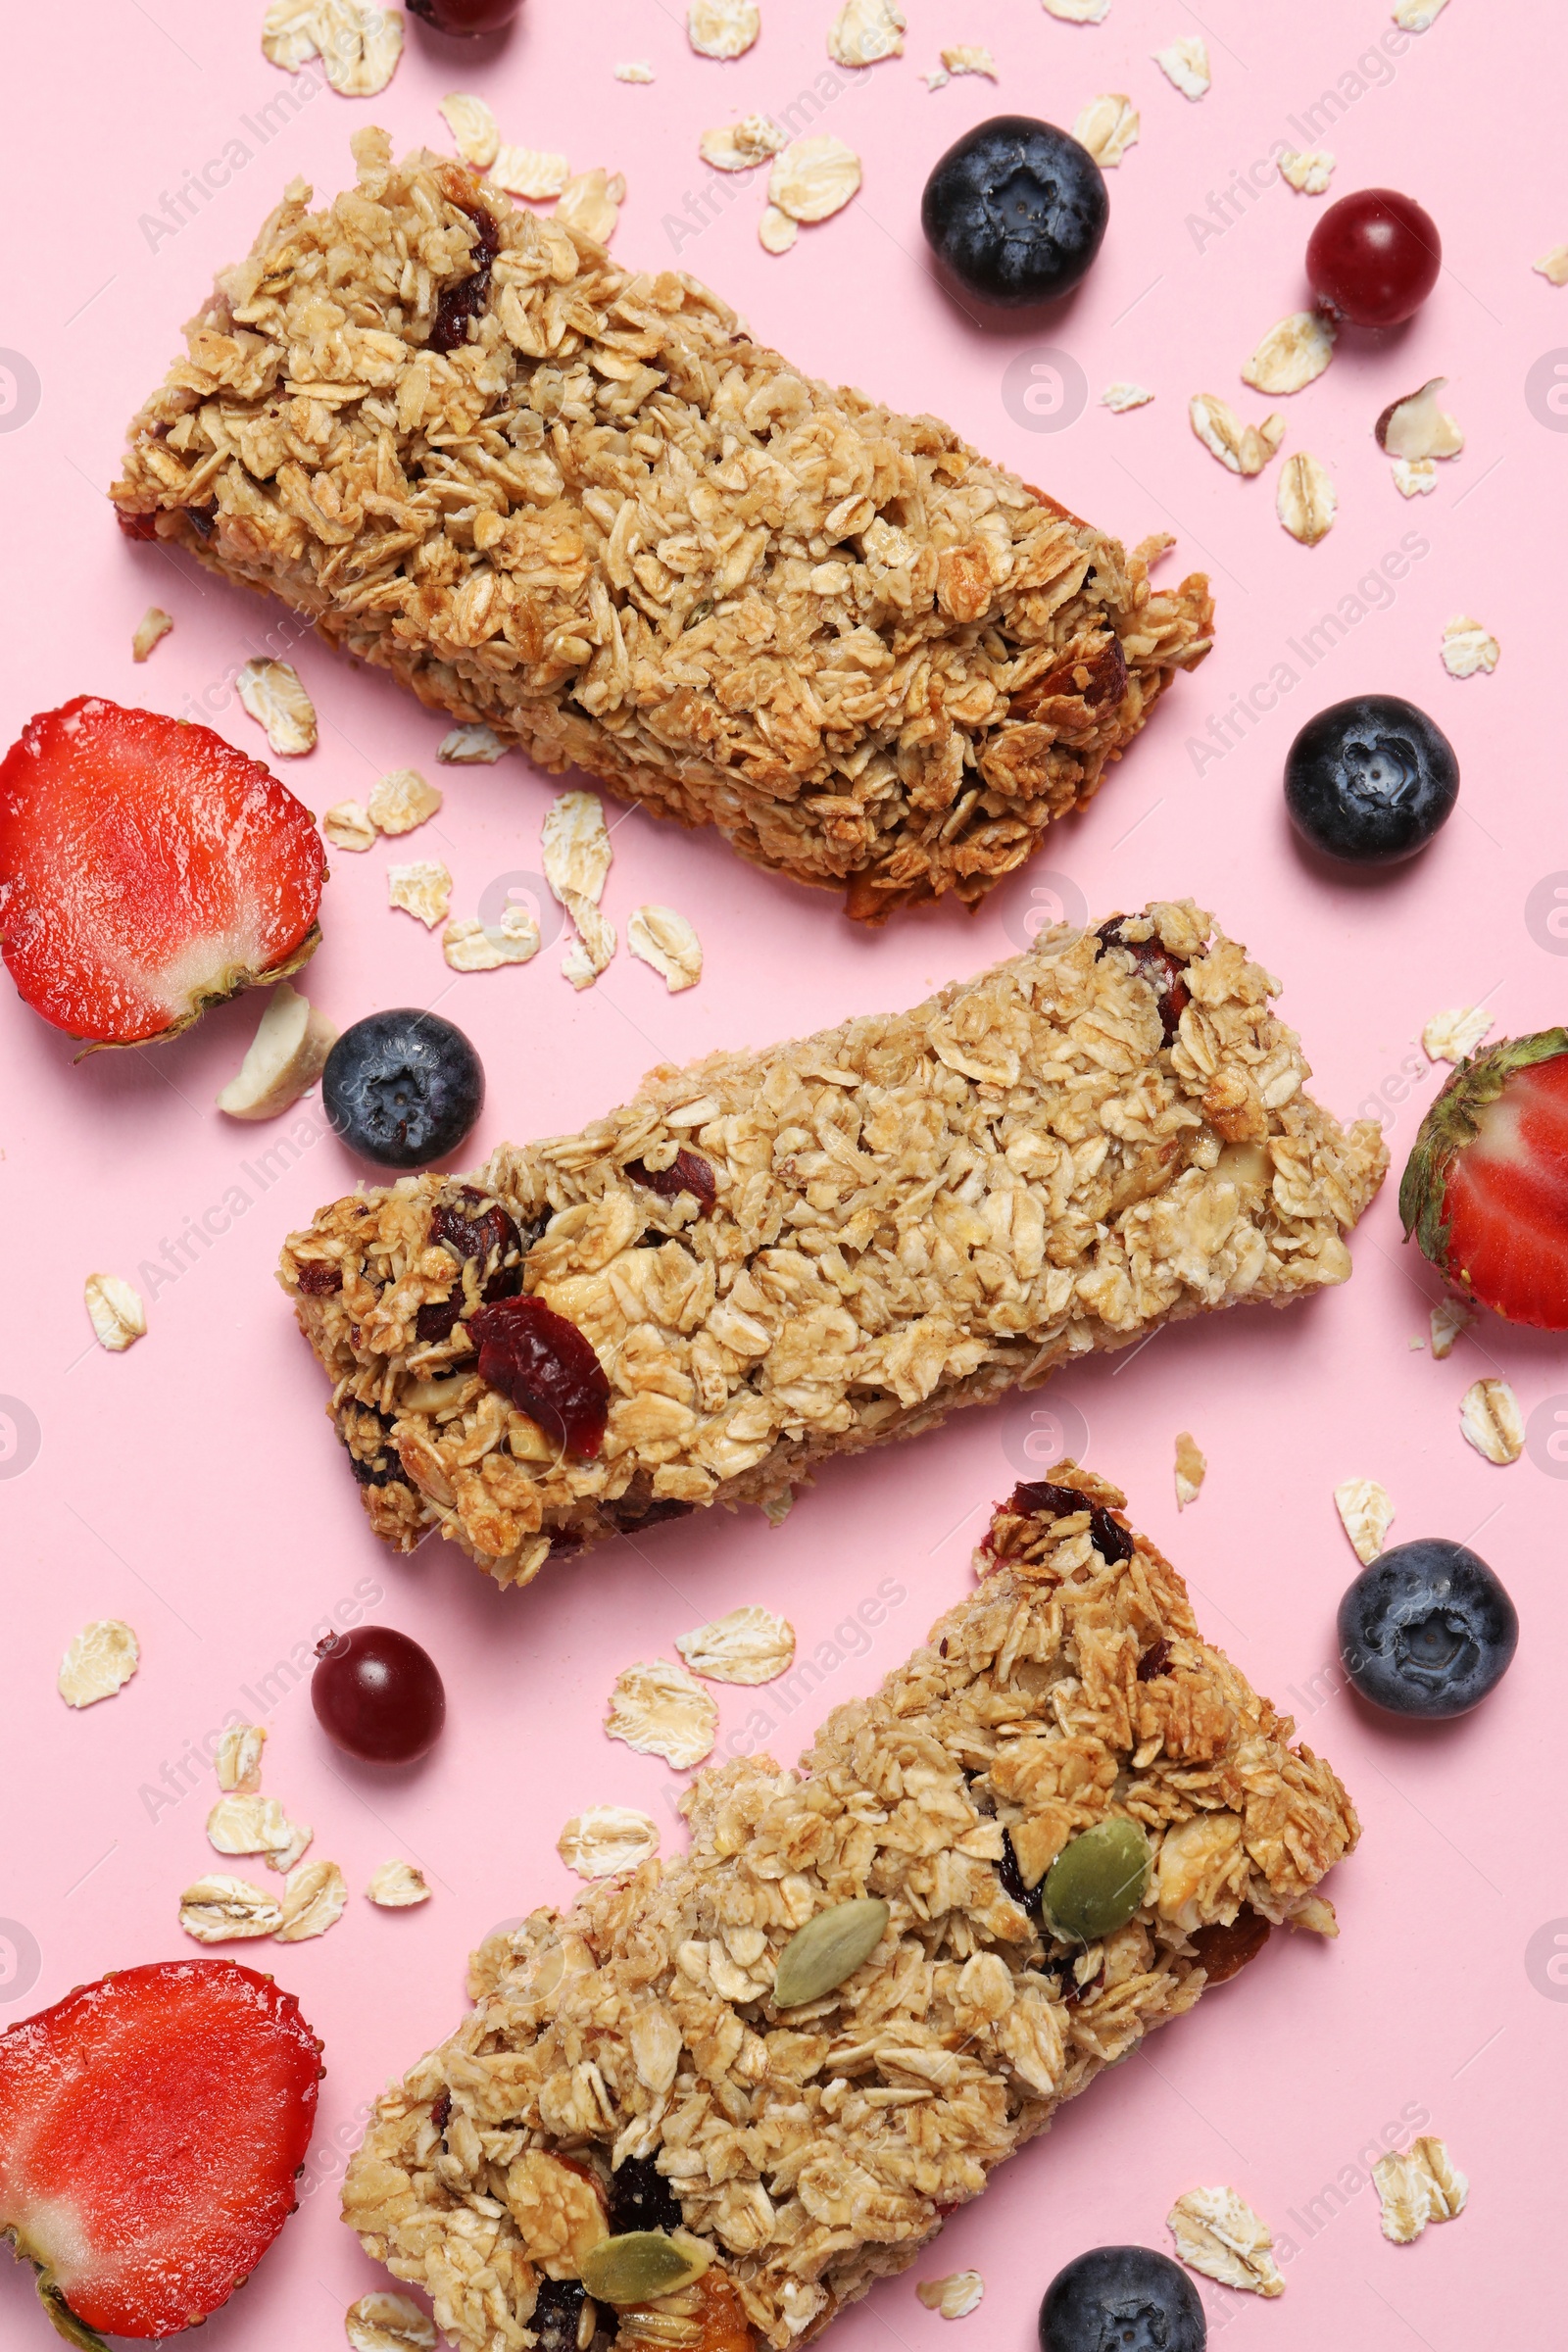 Photo of Tasty granola bars and ingredients on pink background, flat lay